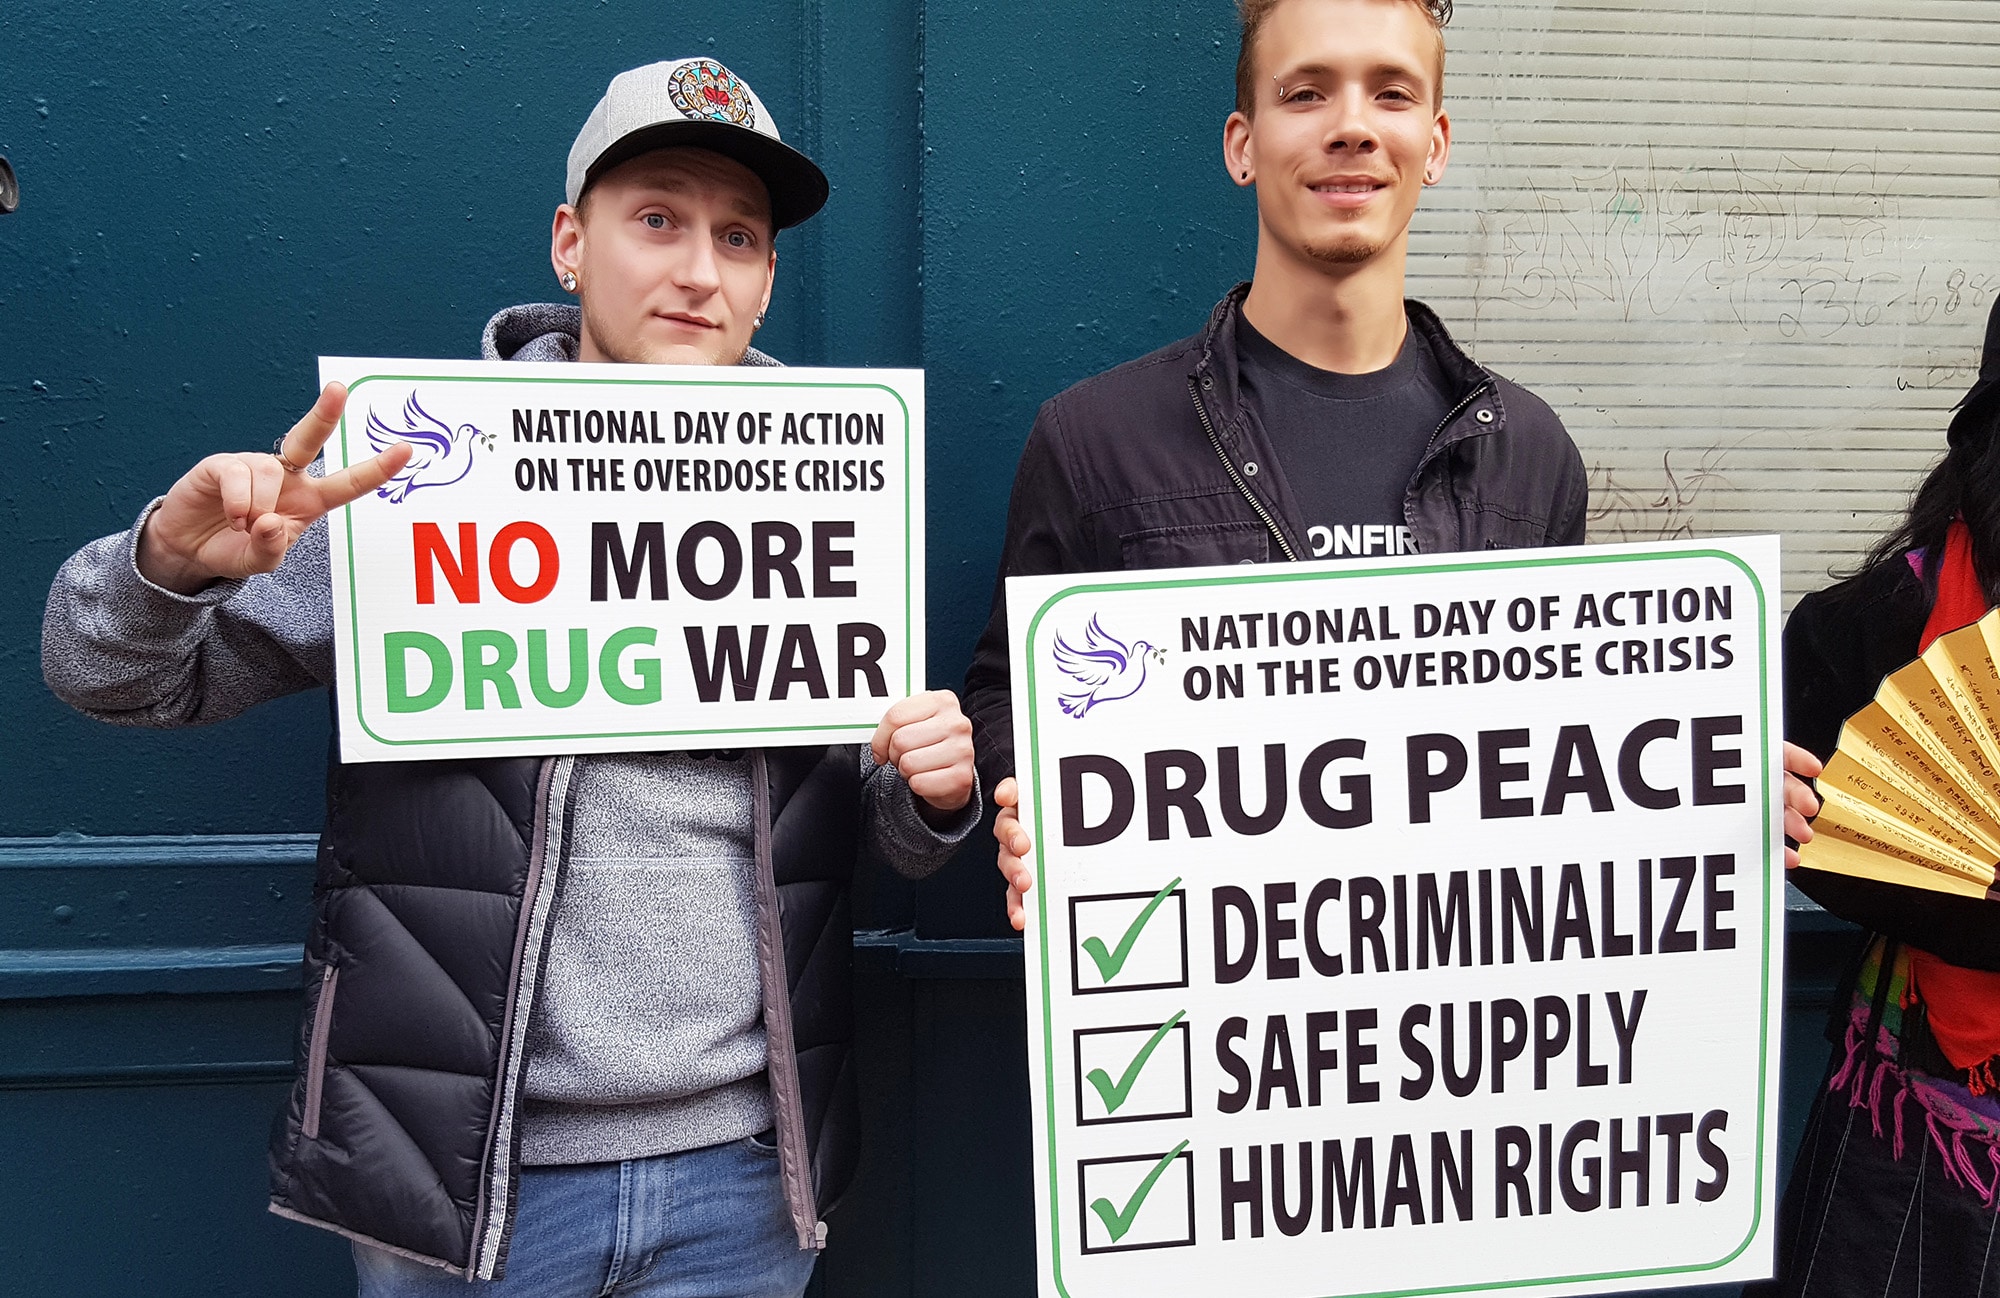 Two men holding of rally signs during National Day of Action 2019